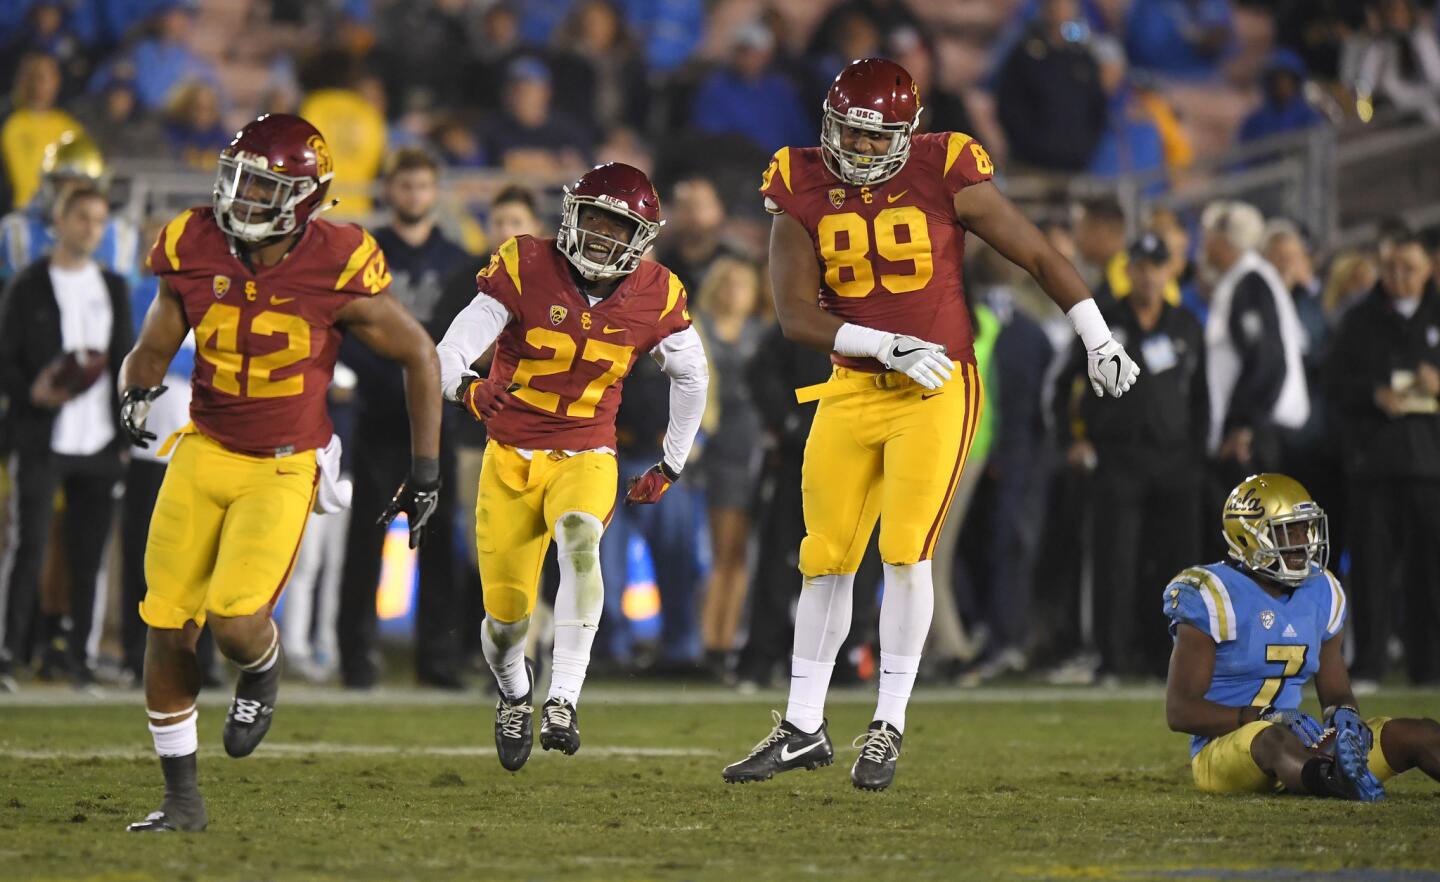 Southern California defensive back Ajene Harris, second from left, celebrates along with linebacker Uchenna Nwosu, left, and defensive end Christian Rector, second from right, after tackling UCLA wide receiver Darren Andrews, right, one yard short of a first down on fourth down during the second half of an NCAA college football game.